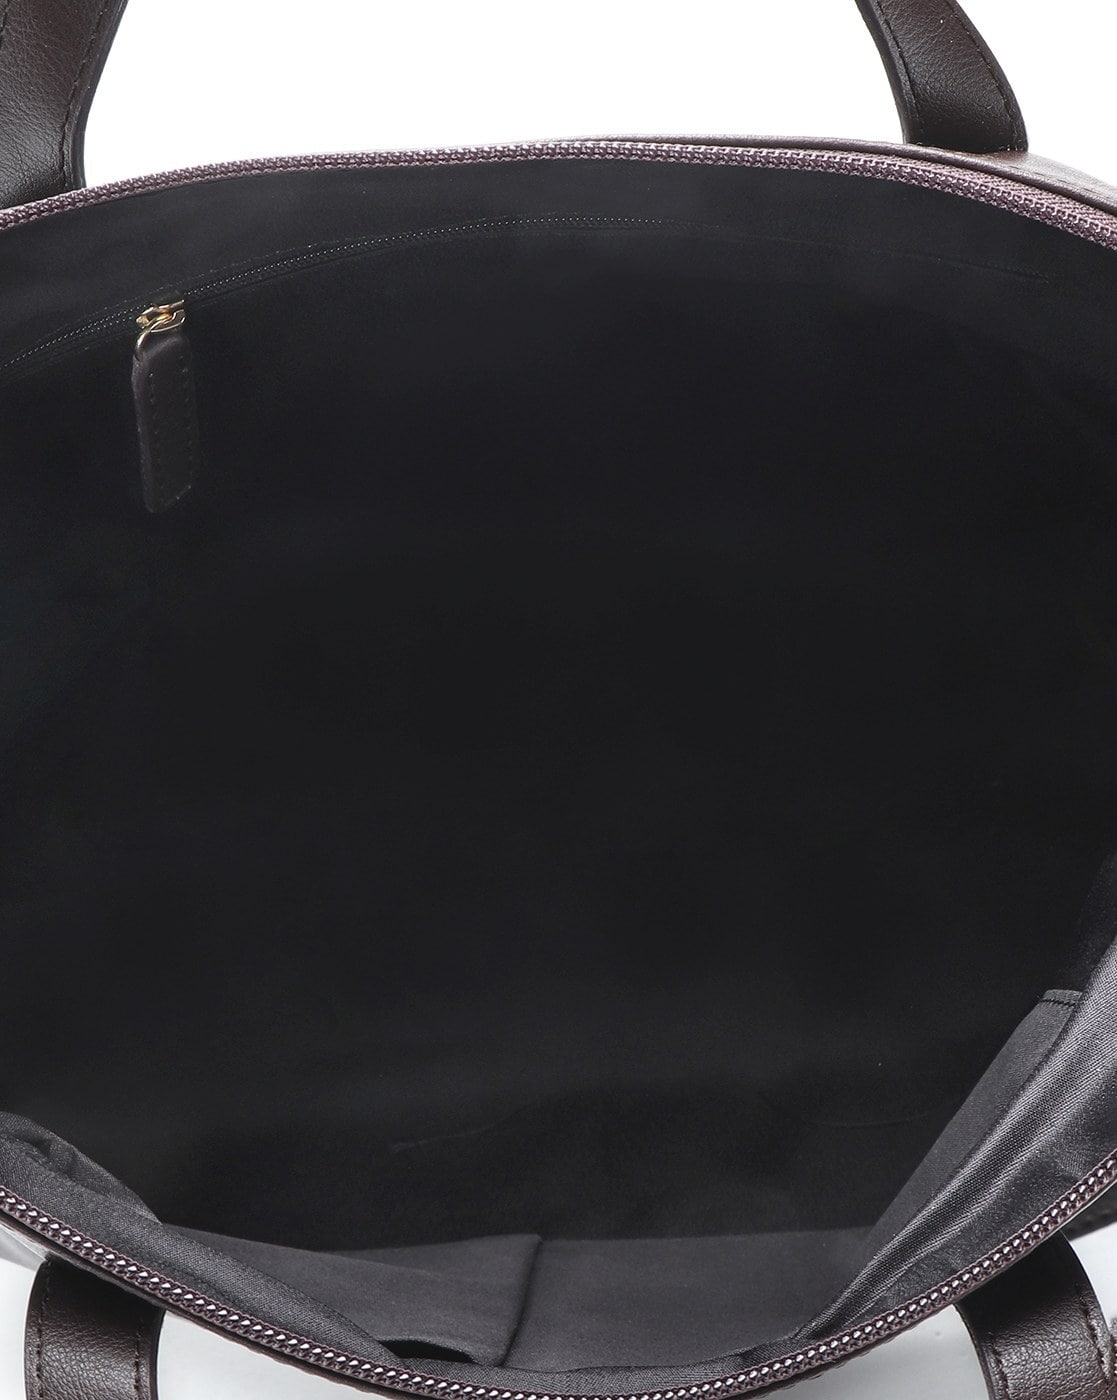 Black Lettered Leather Tote Bag With Large Capacity, Zipper Closure, And  Widebody Rivets Detailing Perfect For Shopping, Travel, Or Everyday Use  From Luxurybag_supplier, $87.73 | DHgate.Com